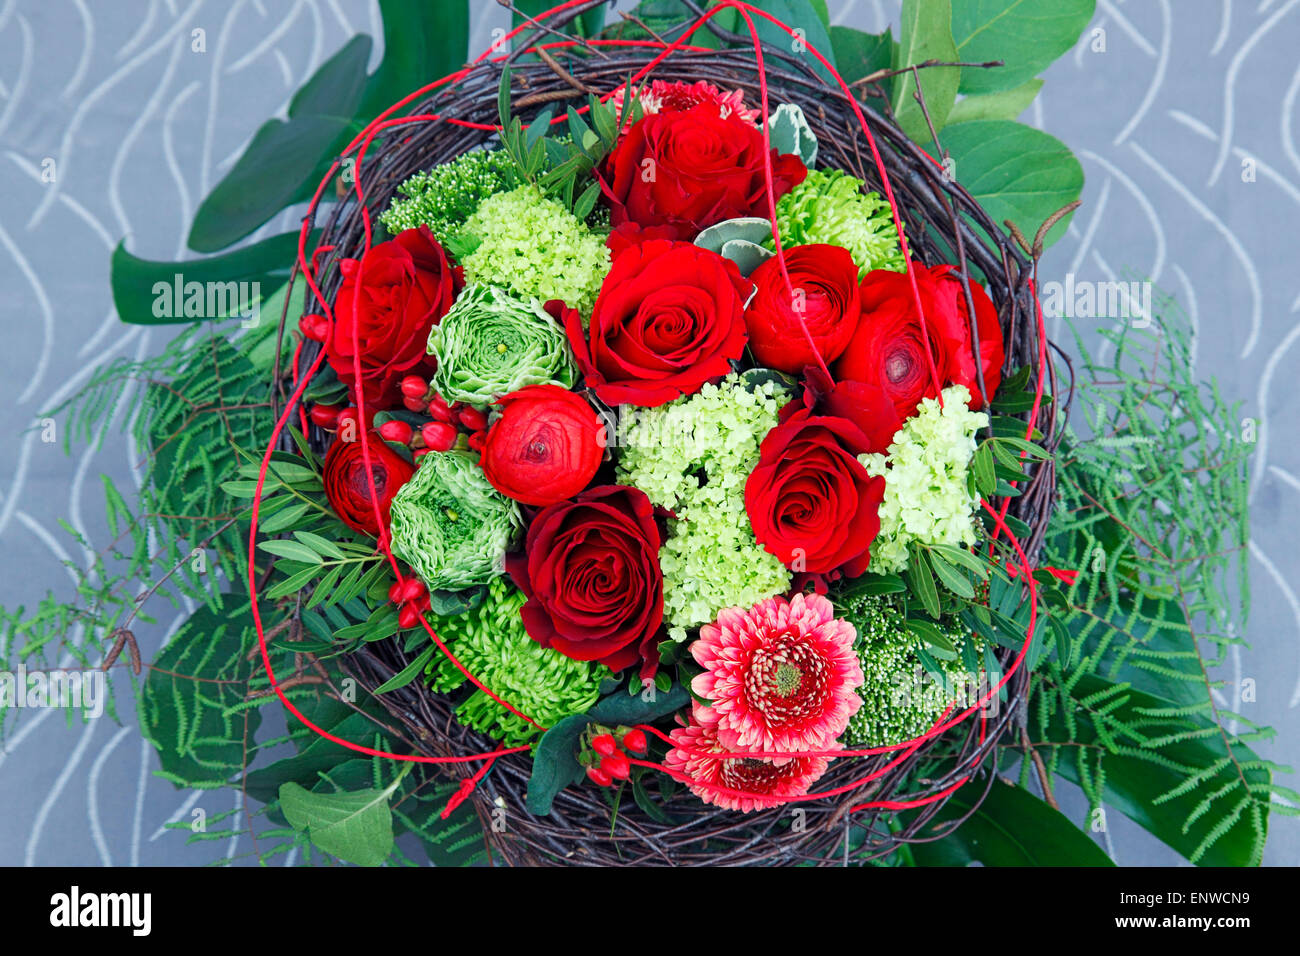 nature, plants, flowers, bunch of flowers, birthday bouquet, red roses, buttercups, ranunculus, gerbera Stock Photo